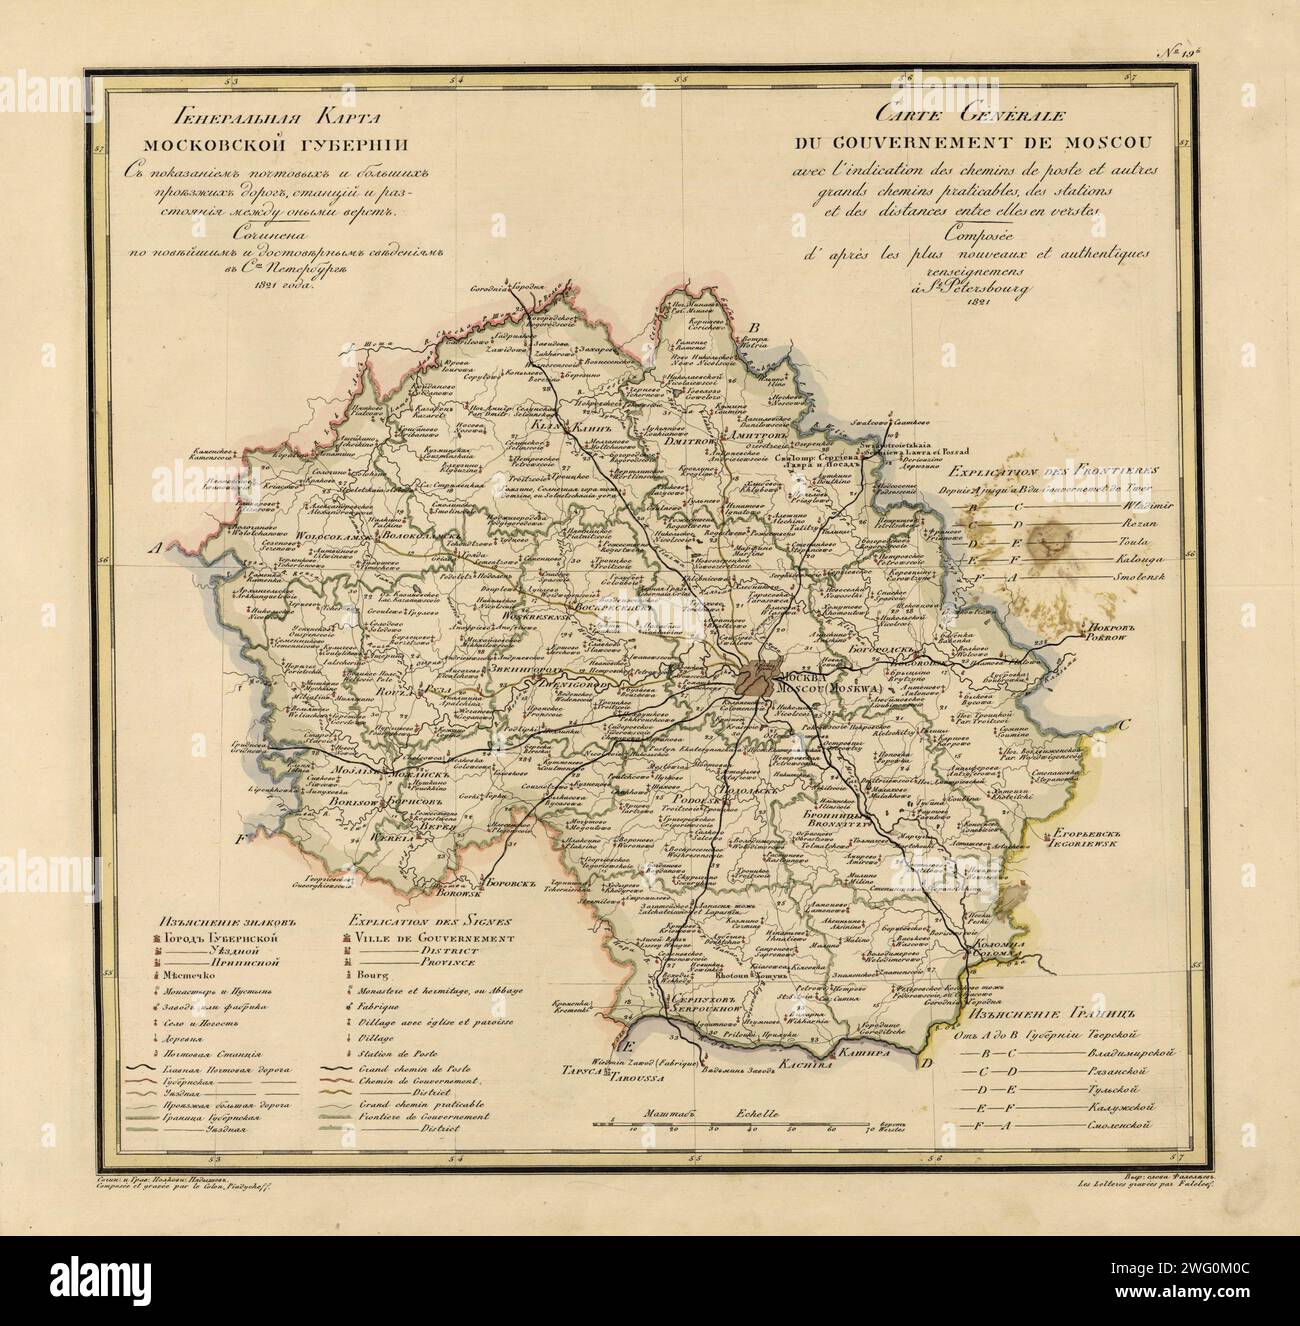 General Map of Moscow Province: Showing Postal and Major Roads, Stations and the Distance in Versts between Them, 1821. This 1821 map of Moscow Province is from a larger work,Geograficheskii atlas Rossiiskoi imperii, tsarstva Pol'skogo i velikogo kniazhestva Finliandskogo(Geographical atlas of the Russian Empire, the Kingdom of Poland, and the Grand Duchy of Finland), containing 60 maps of the Russian Empire. Compiled and engraved by Colonel V.P. Piadyshev, it reflects the detailed mapping carried out by Russian military cartographers in the first quarter of the 19th century. The map shows pop Stock Photo